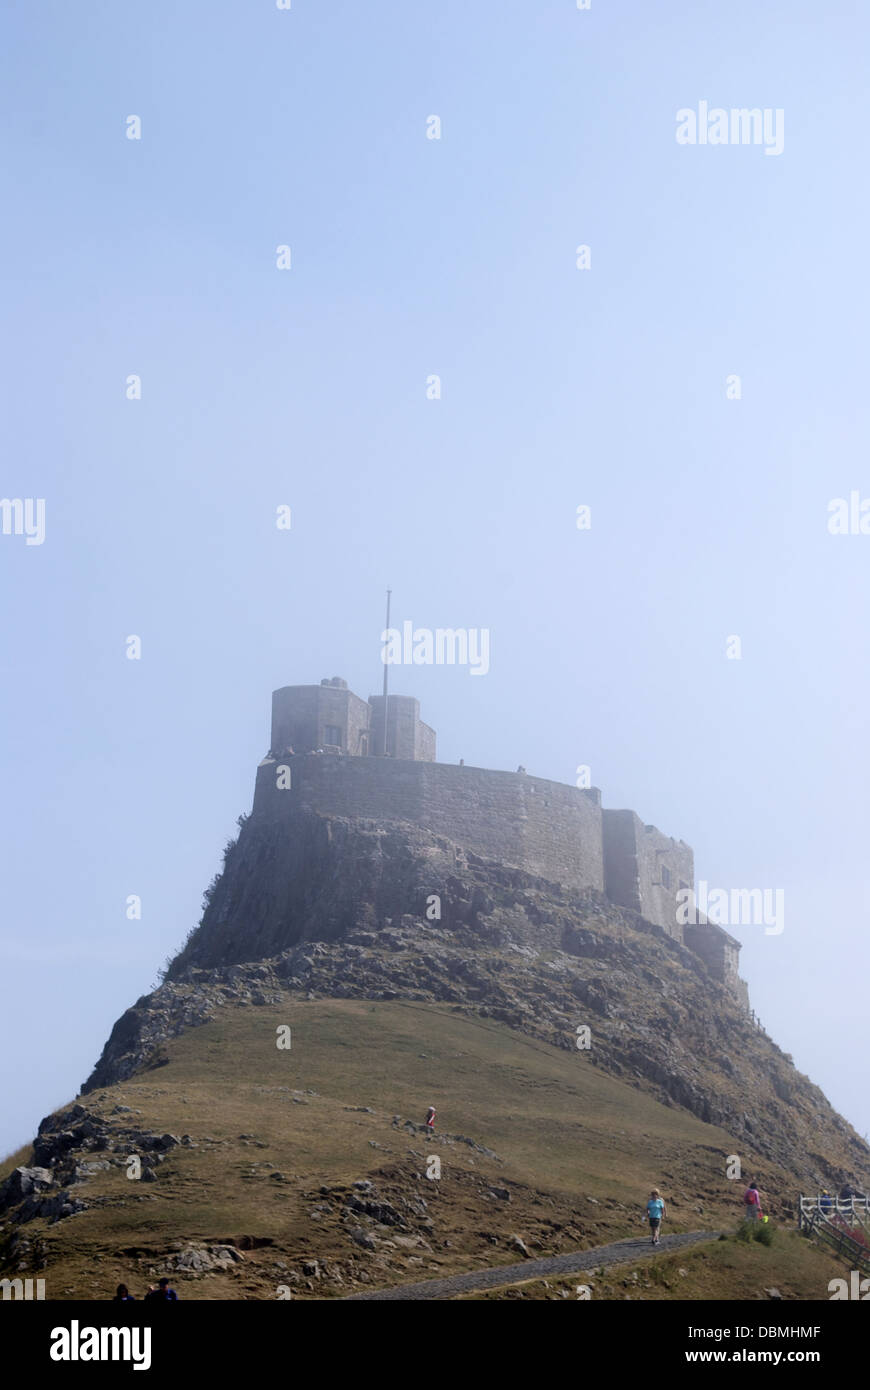 Misty view looking up at the castle on holy island Stock Photo